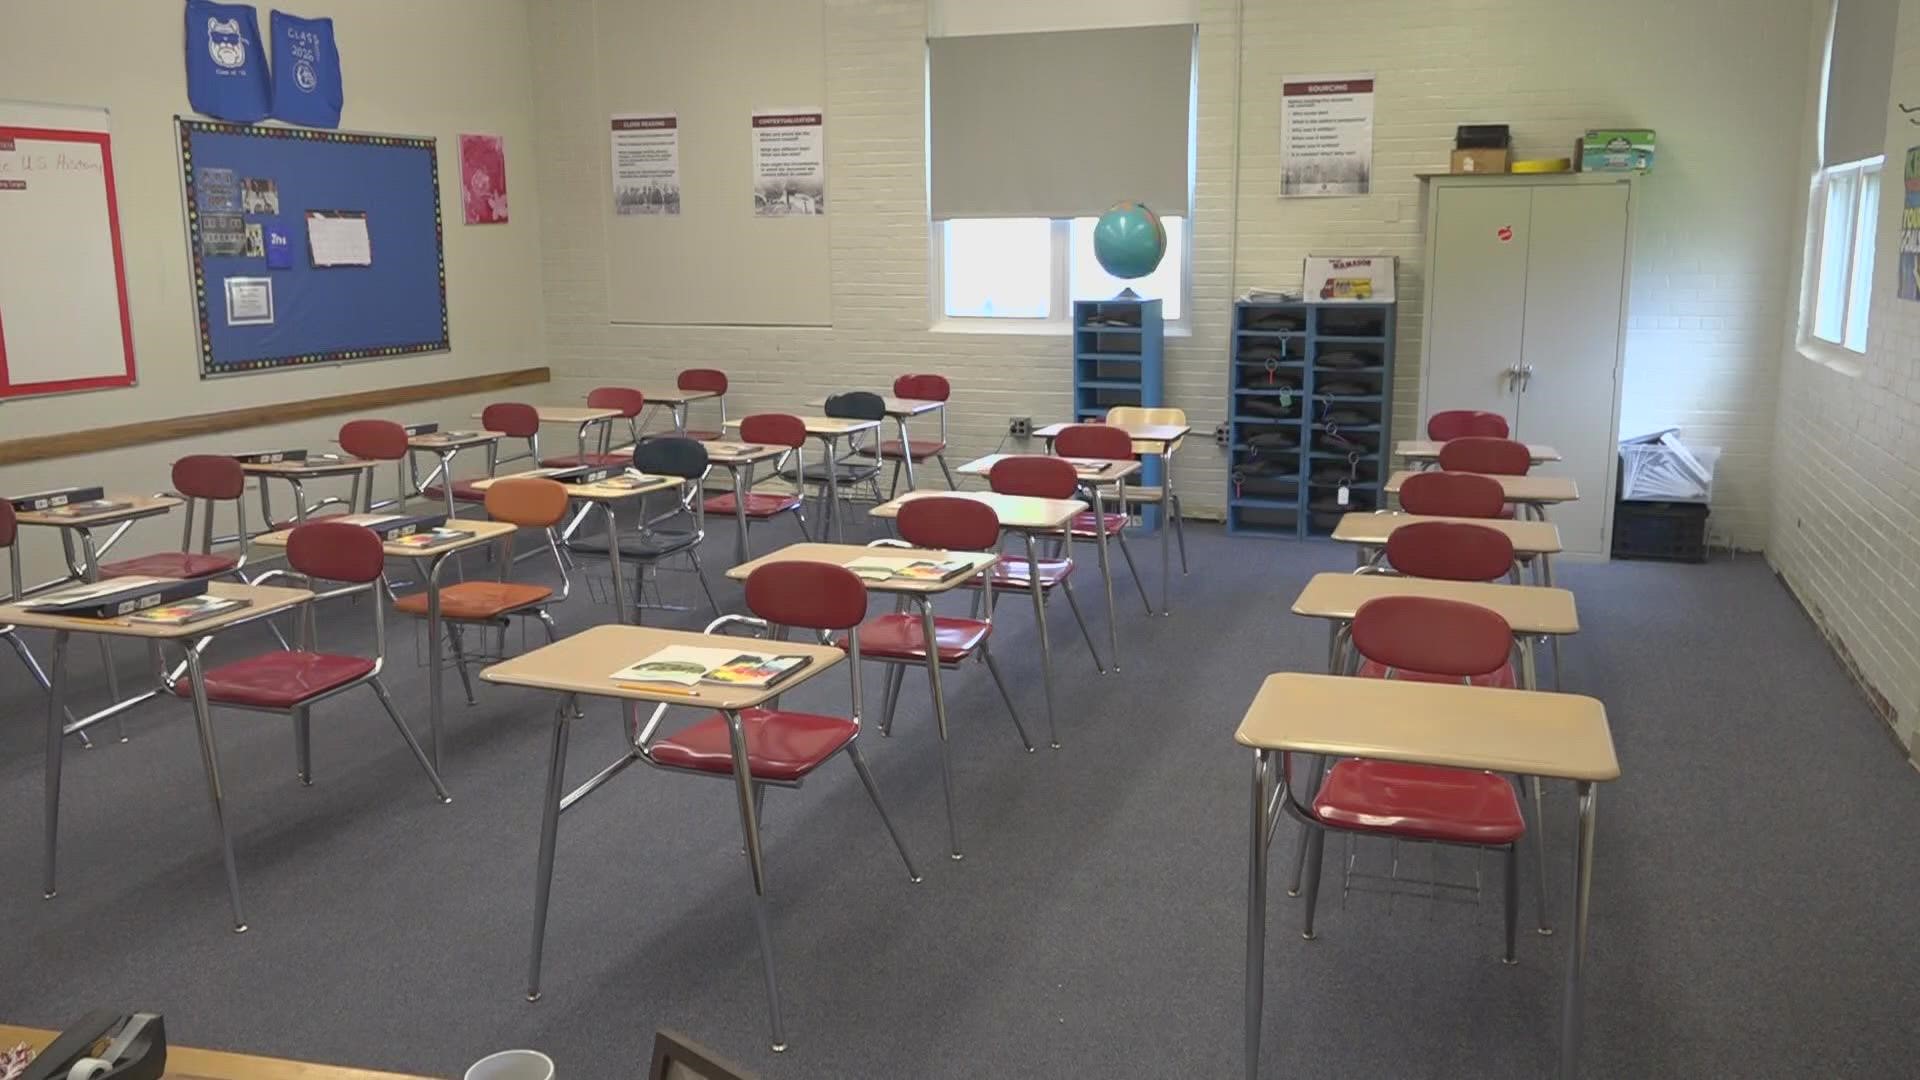 Maine students return to school this week, and school safety is weighing heavy on many parents' minds.